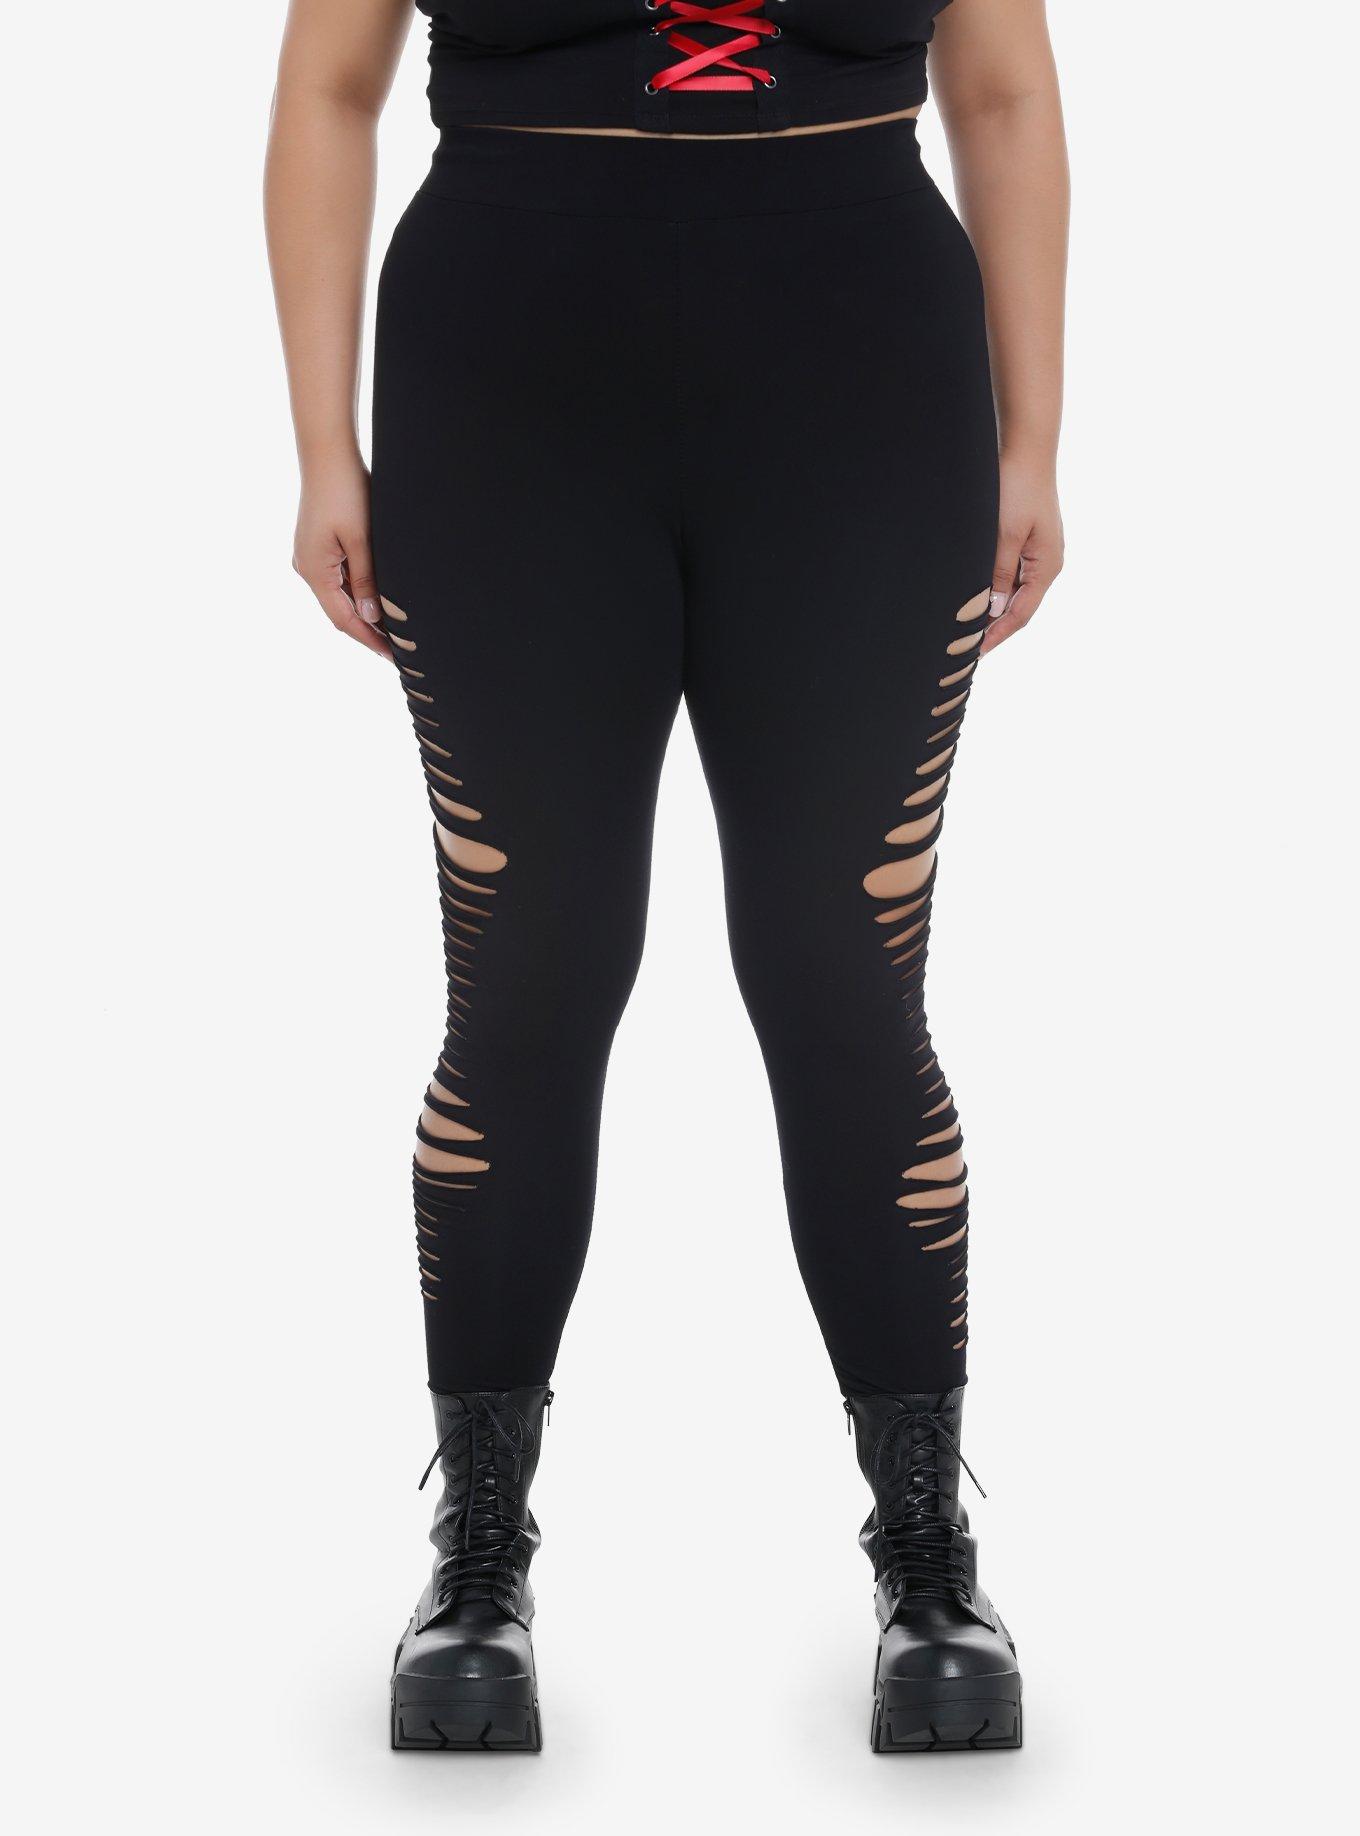 Ripped Up Torn Apart Leggings (Plus Sizes Available) –